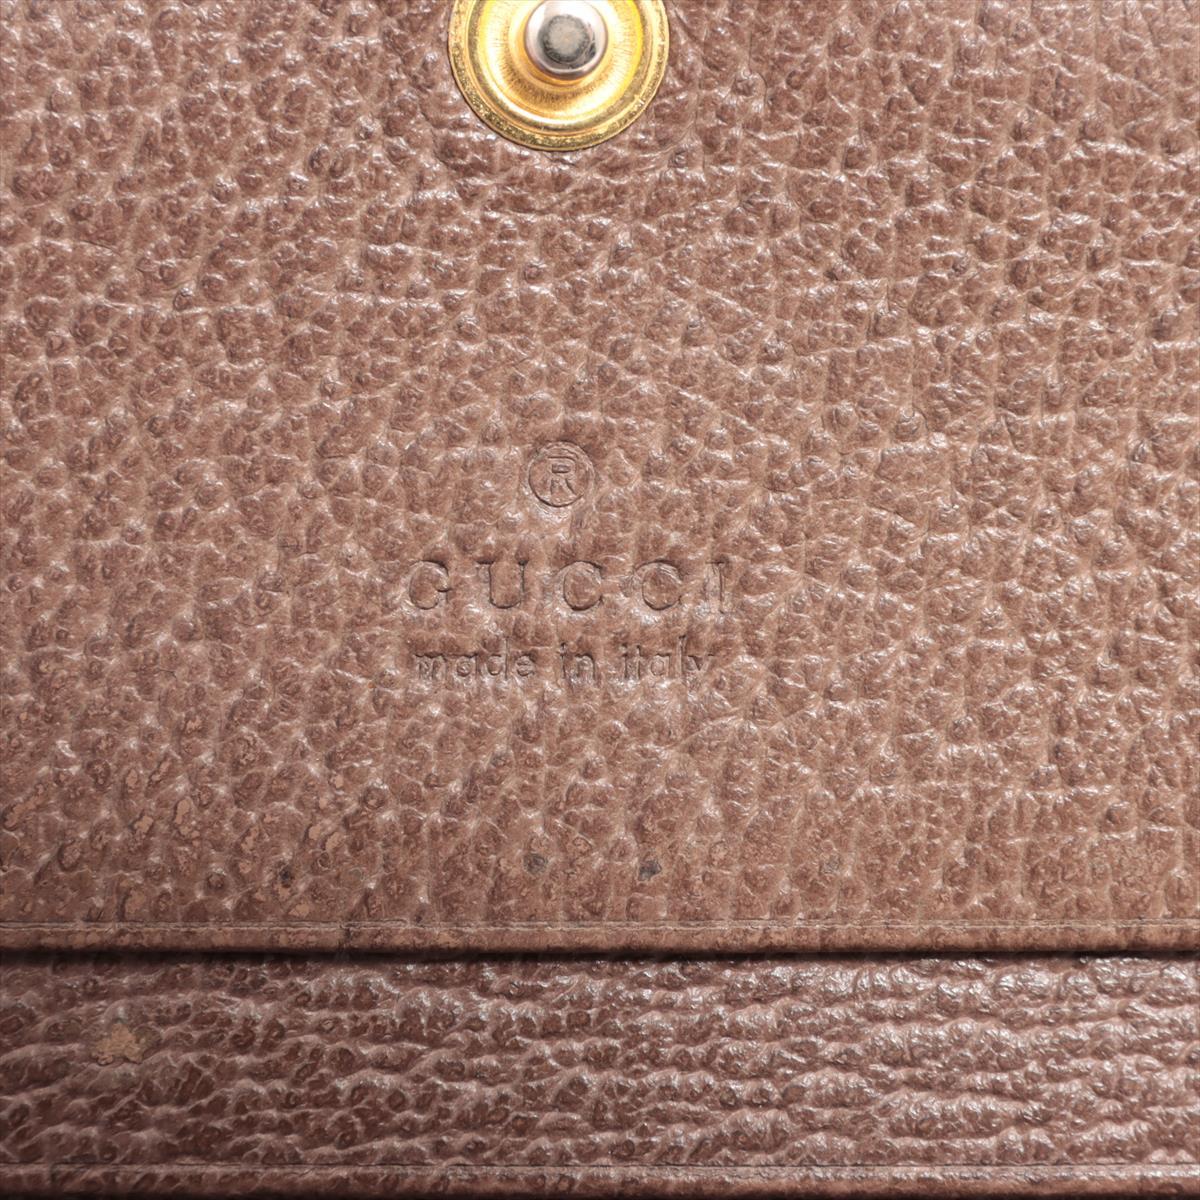 Gucci GG Supreme Ophidia Card Case Wallet 3